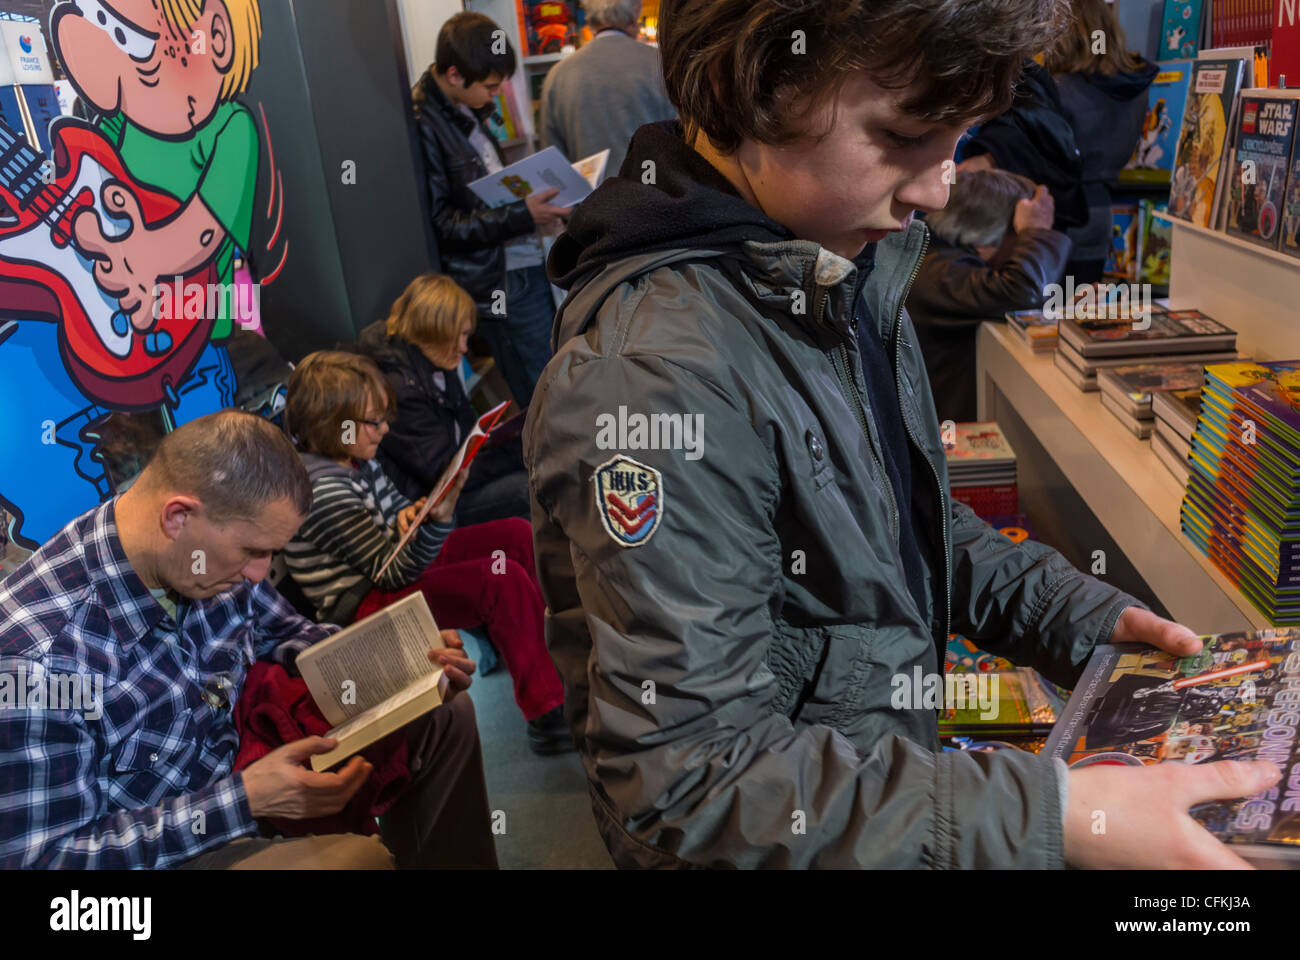 Paris, France, Teenagers Reading Comic Book in French Salon du Livre, Book Fair, Library Stock Photo